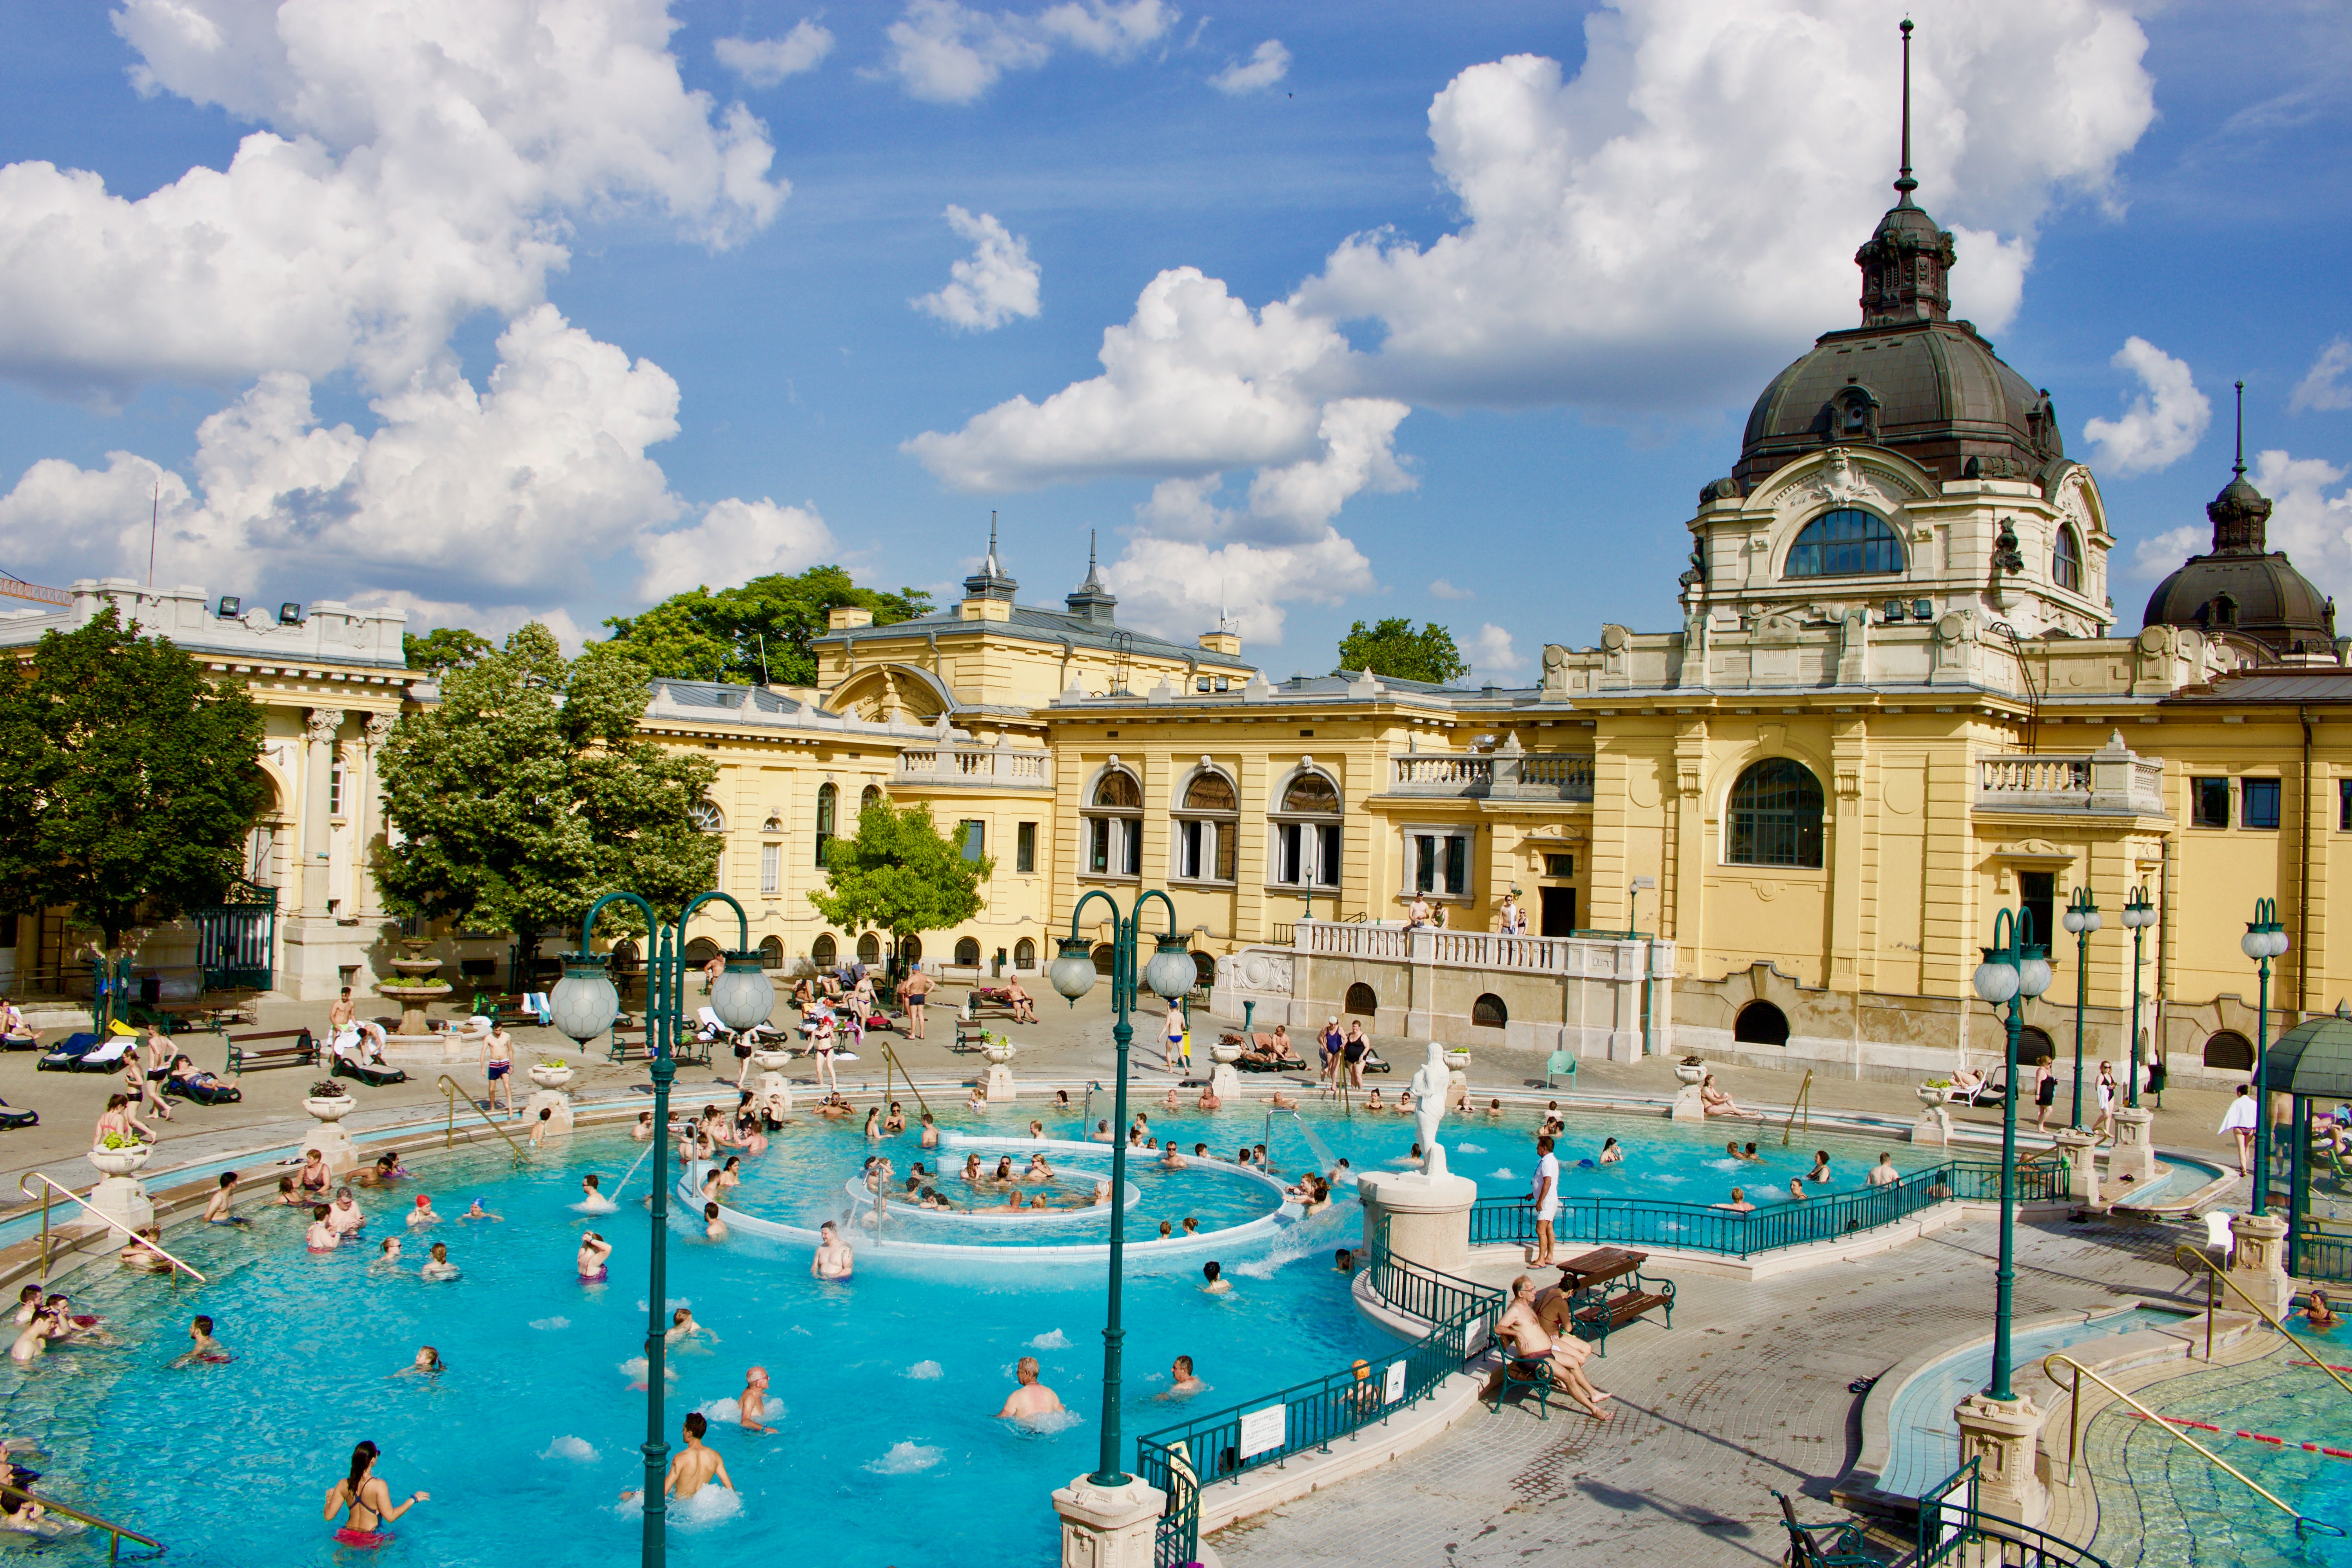 The Széchenyi Baths are one of Budapest’s most popular tourist attractions